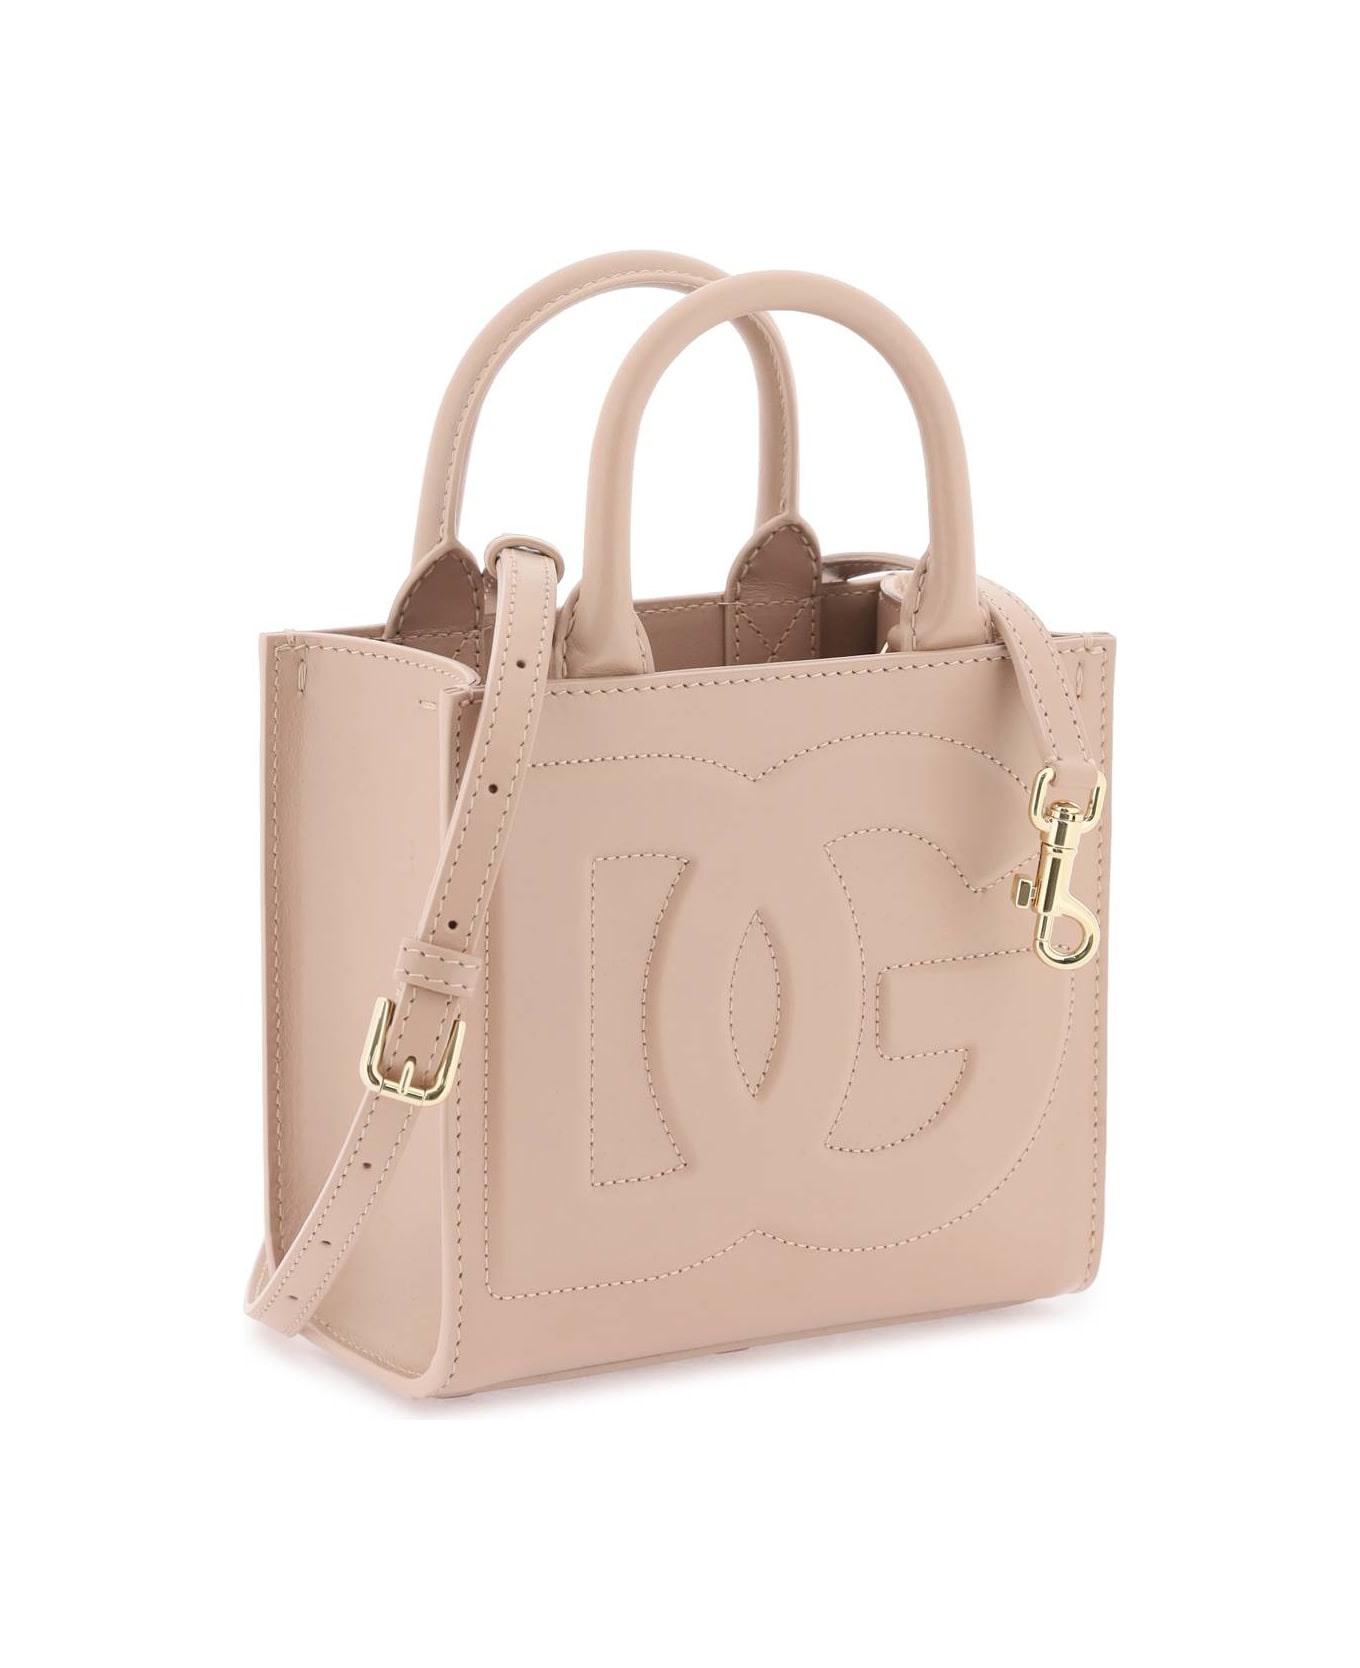 Dolce & Gabbana Dg Daily Tote Bag - Pale pink トートバッグ